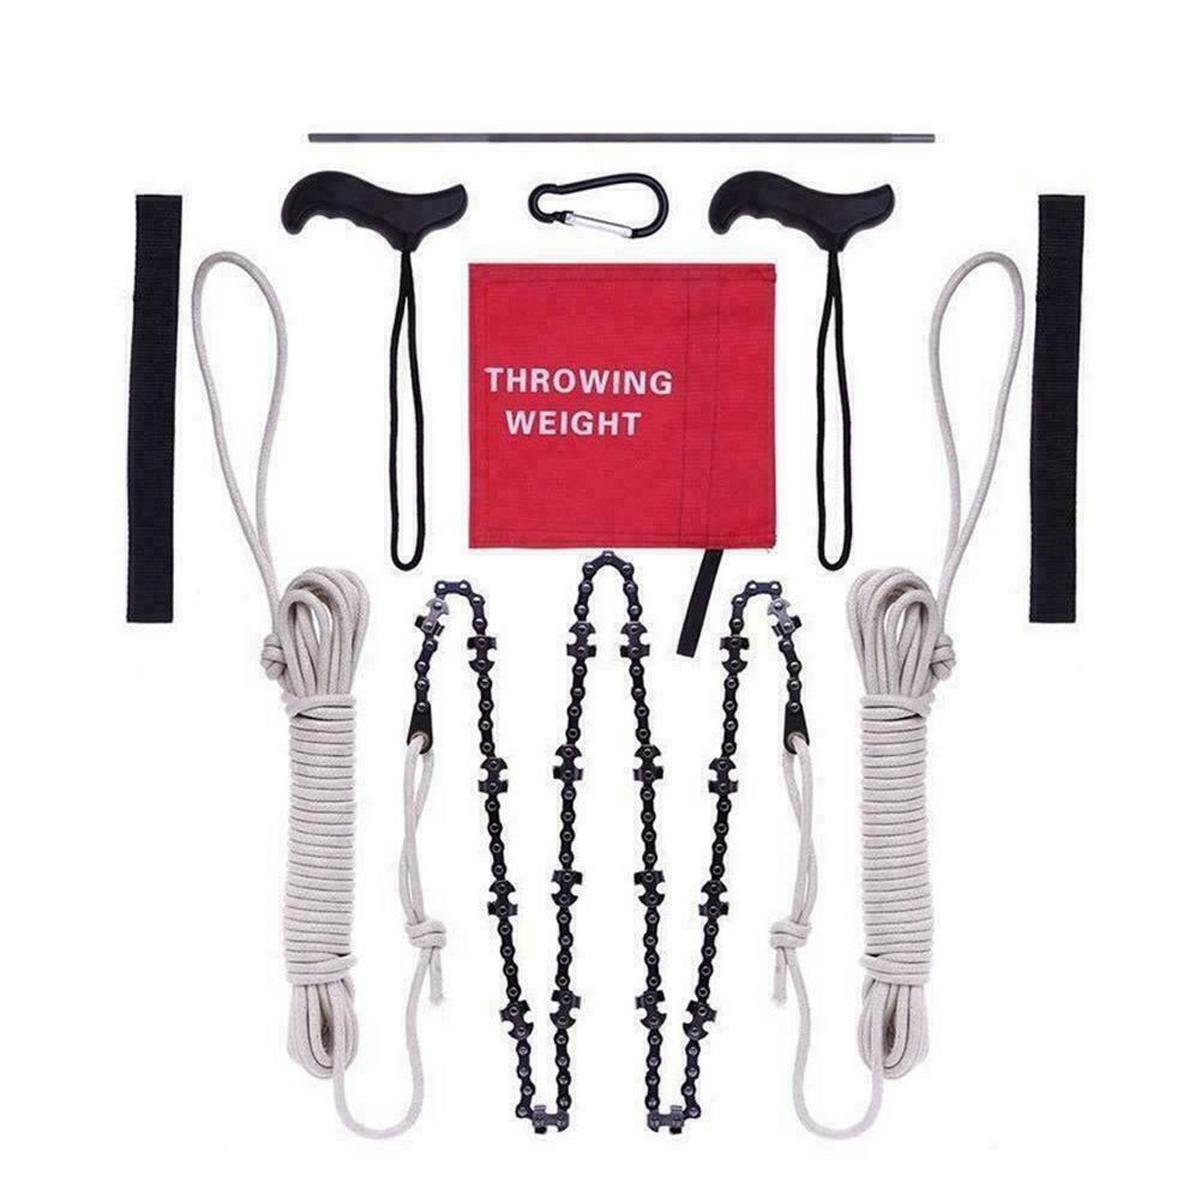 48 Inch High Reach Rope Chain Saw Tool Kit 64 Sections 42 Blades Cutter on Both Sides Outdoor Wood Cutting Camping Tool